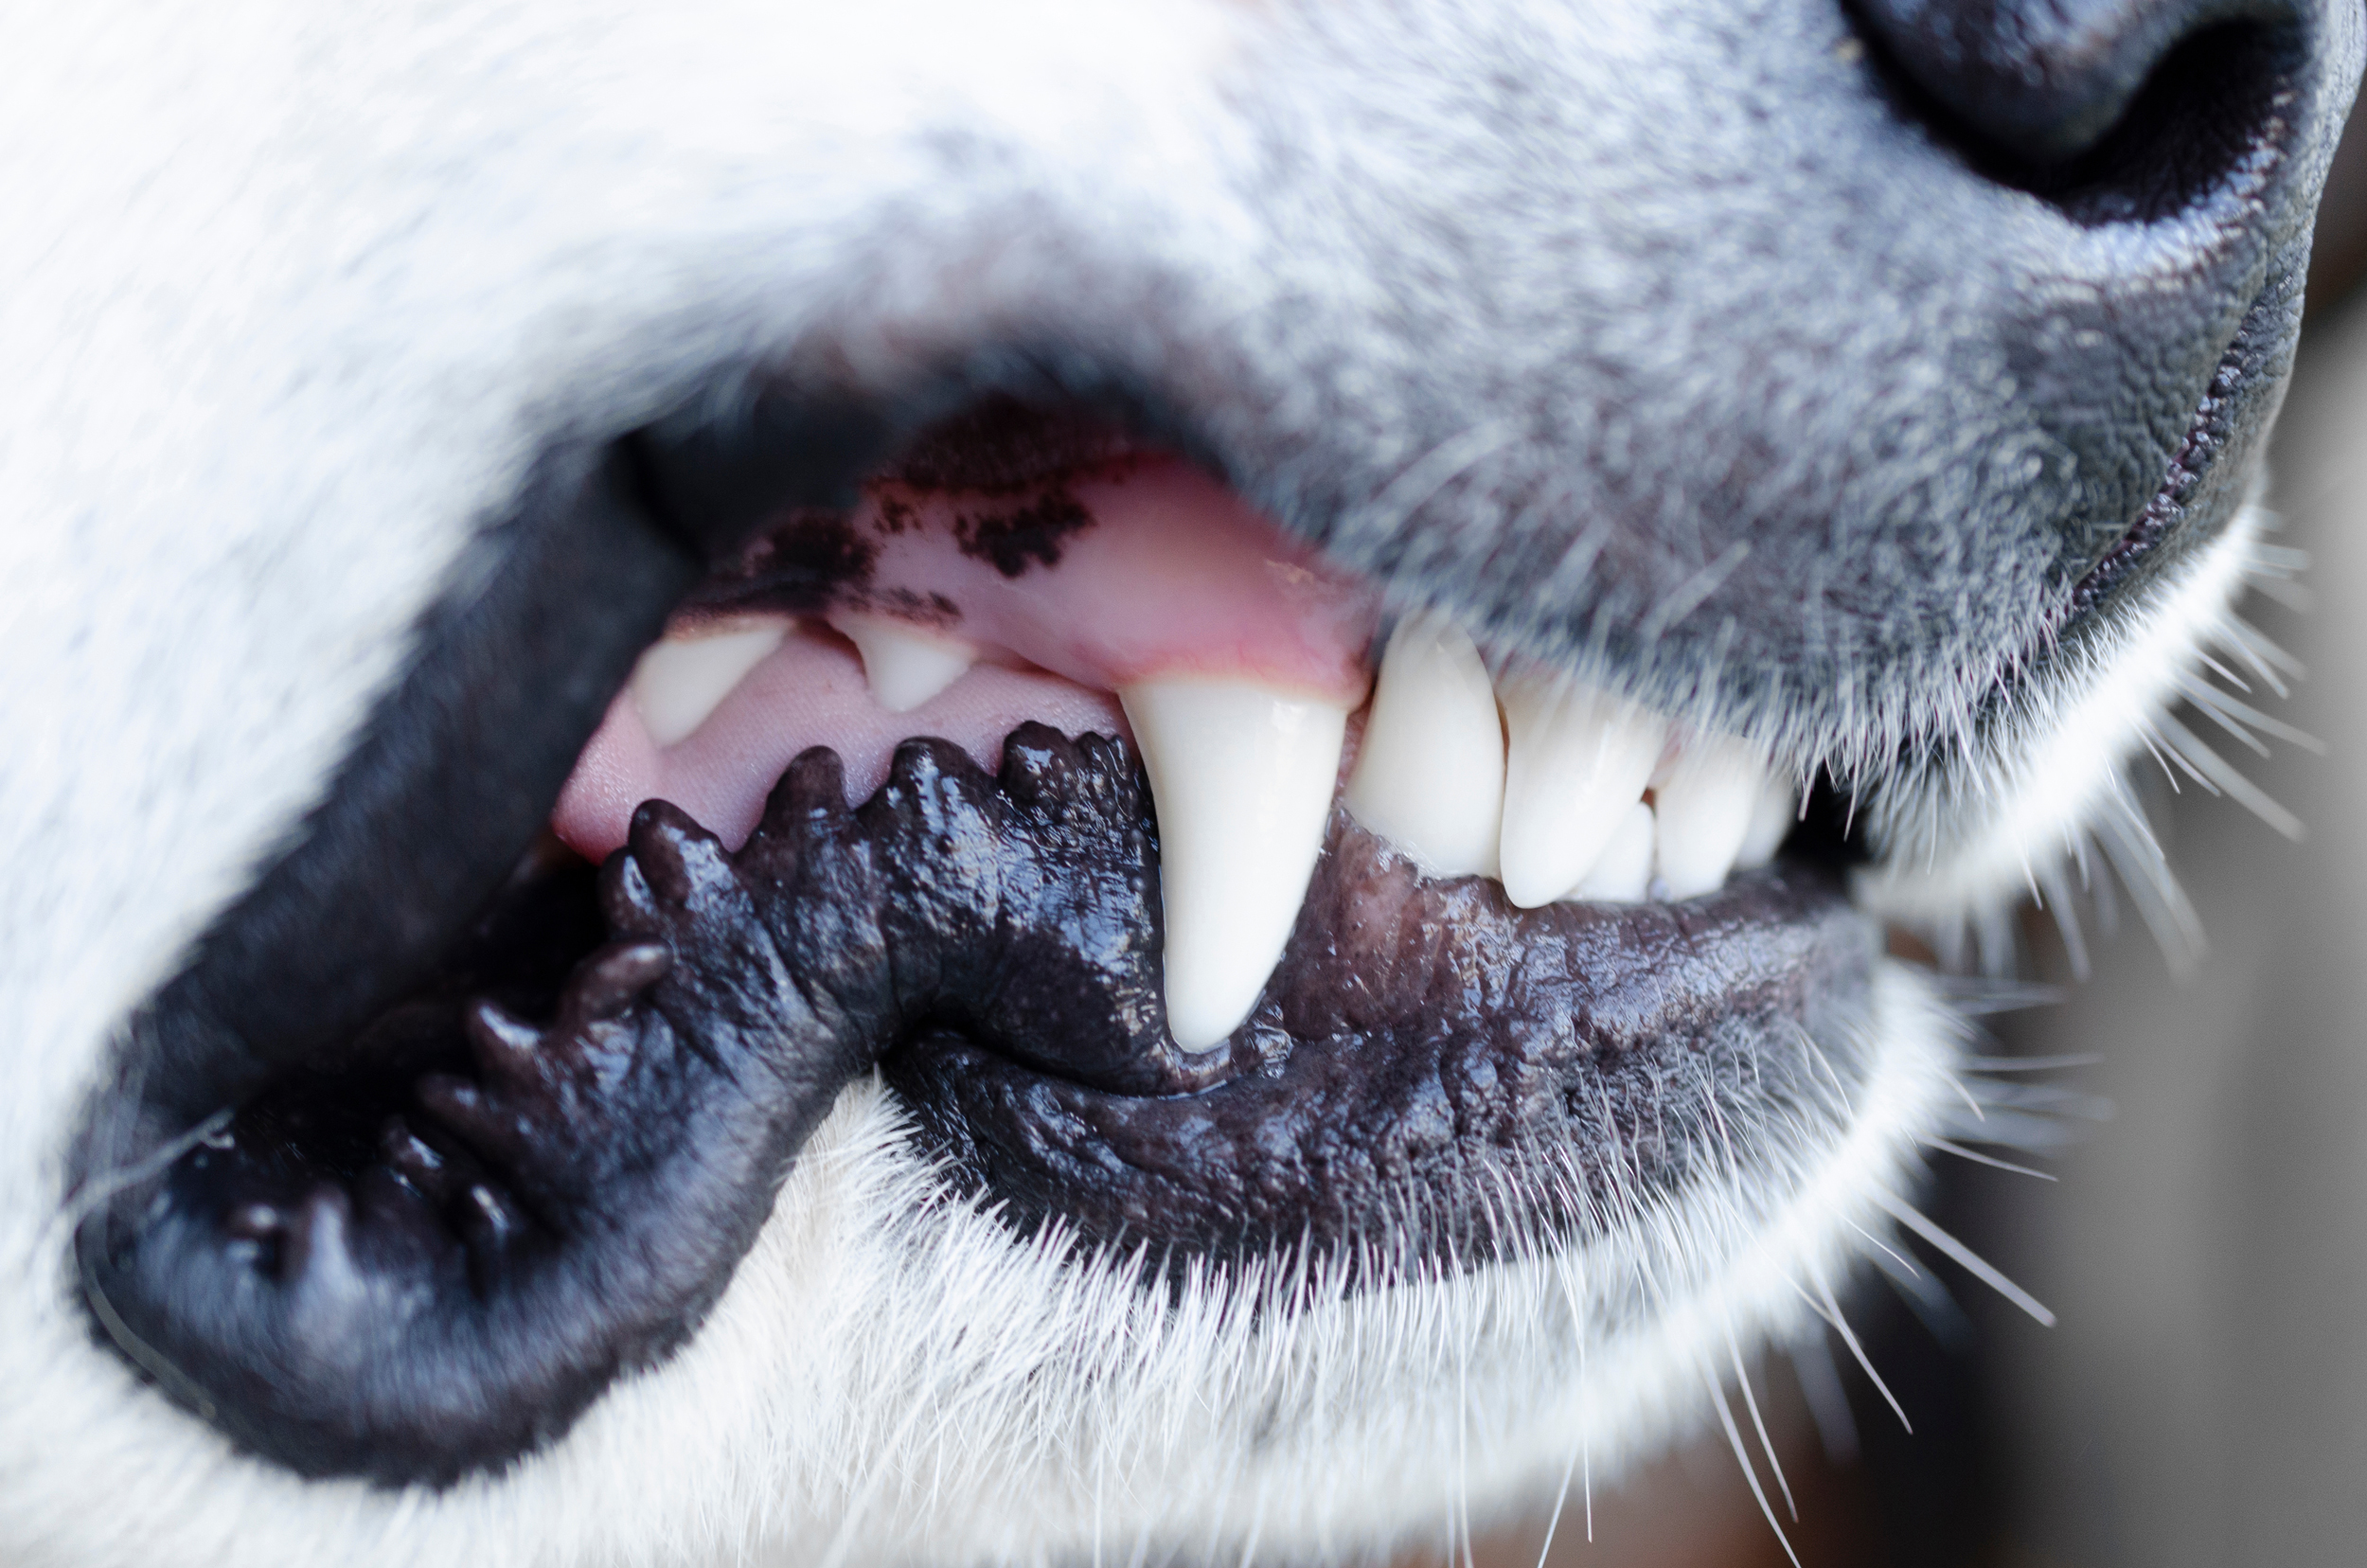 A Close-Up Image Of A Dog'S Teeth Being Brushed With A Toothbrush And Toothpaste Containing Ascophyllum Nodosum For Dogs, A Natural Ingredient Known For Promoting Oral Health In Dogs.